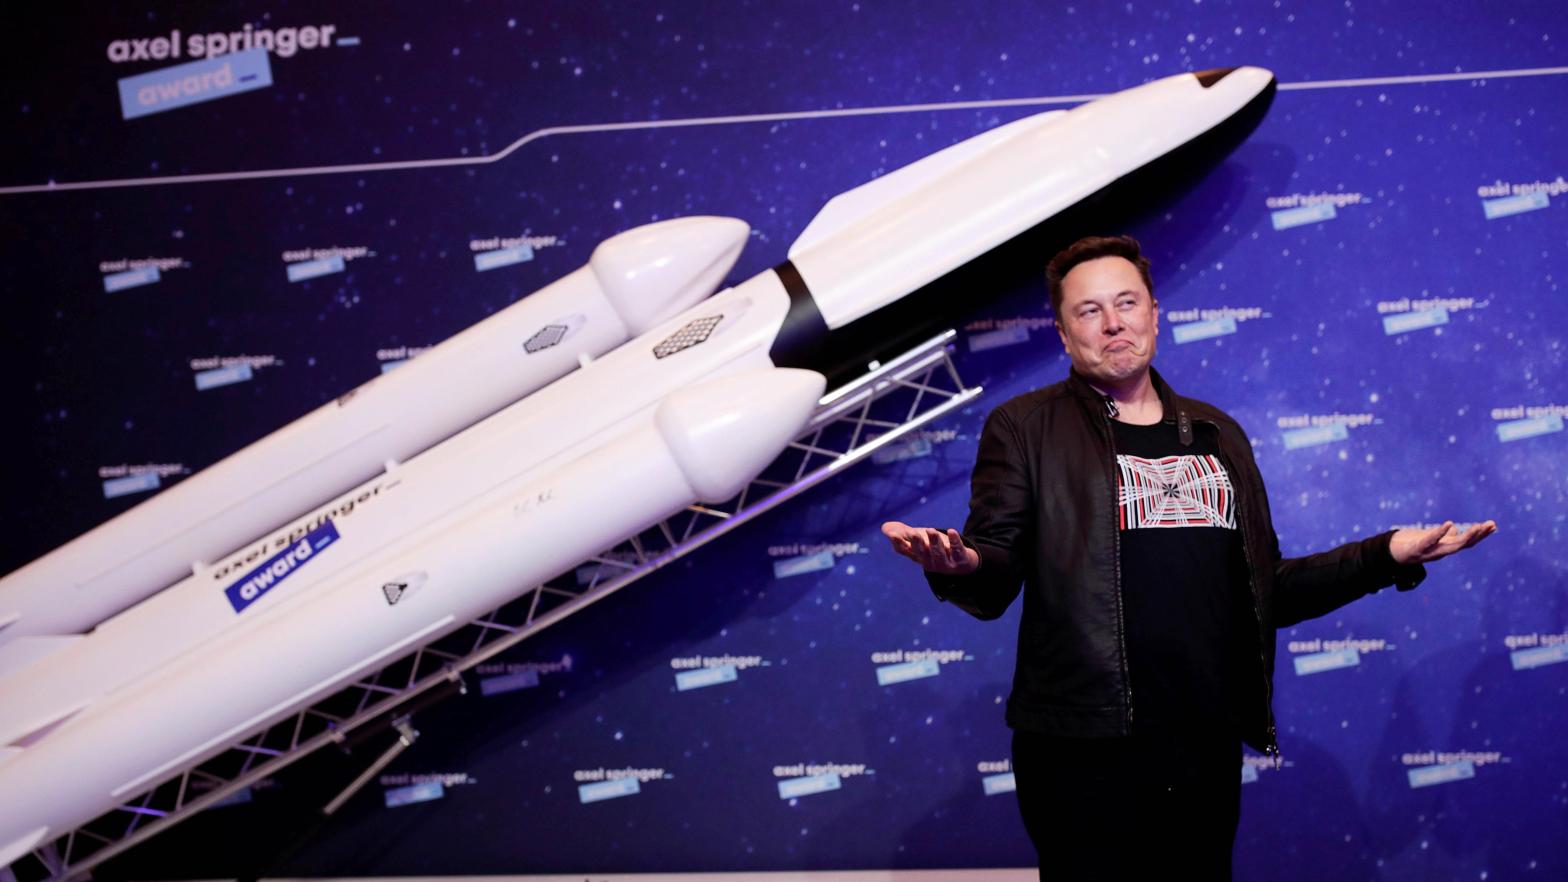 SpaceX employees say they illegally fired after organising an open letter about Elon Musk's behaviour. (Photo: Hannibal Hanschke-Pool, Getty Images)